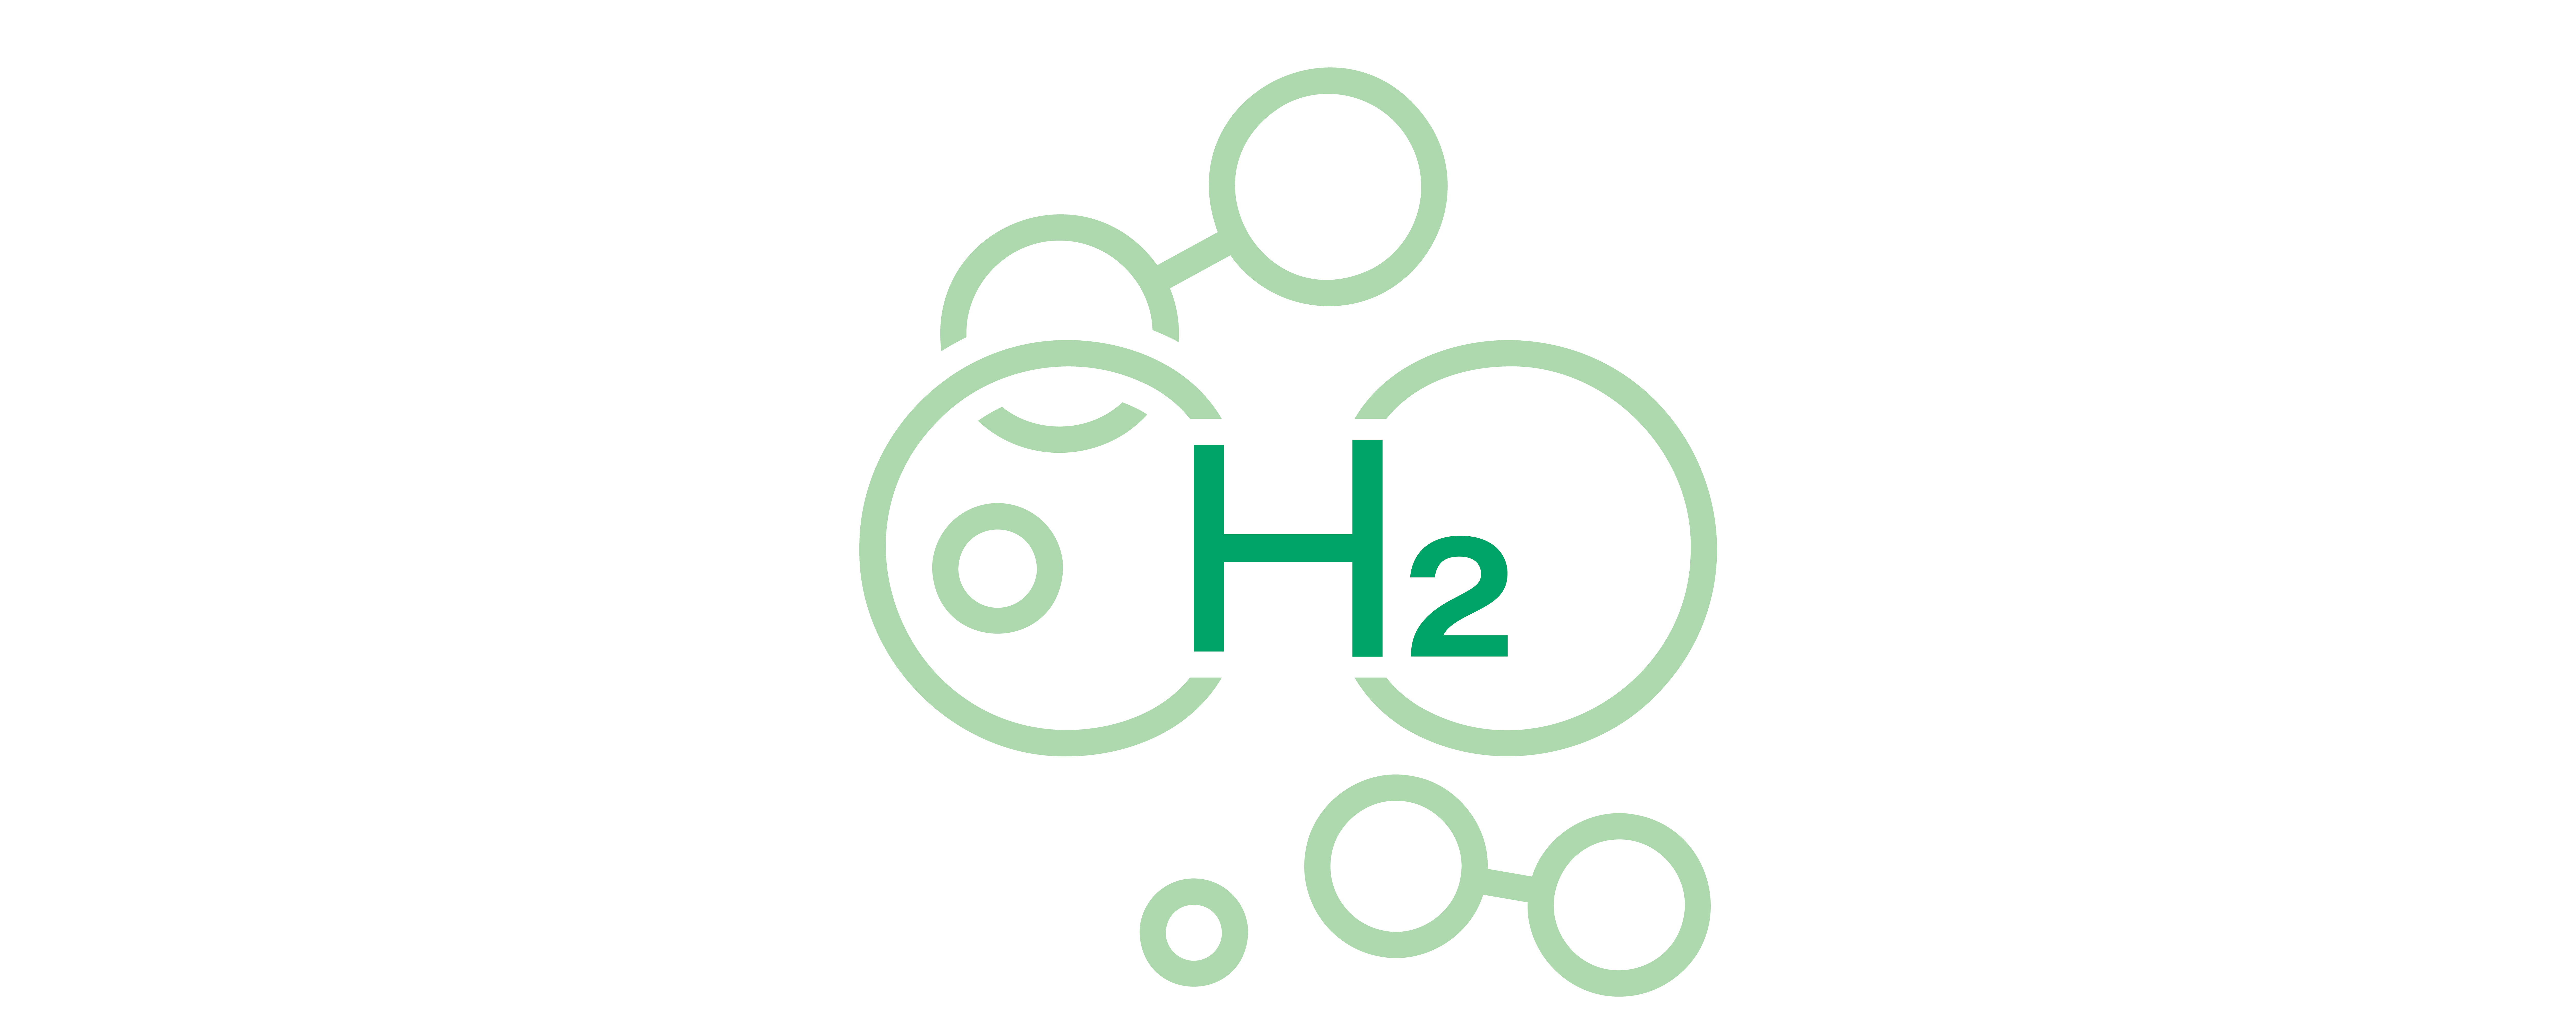 The rise of green hydrogen